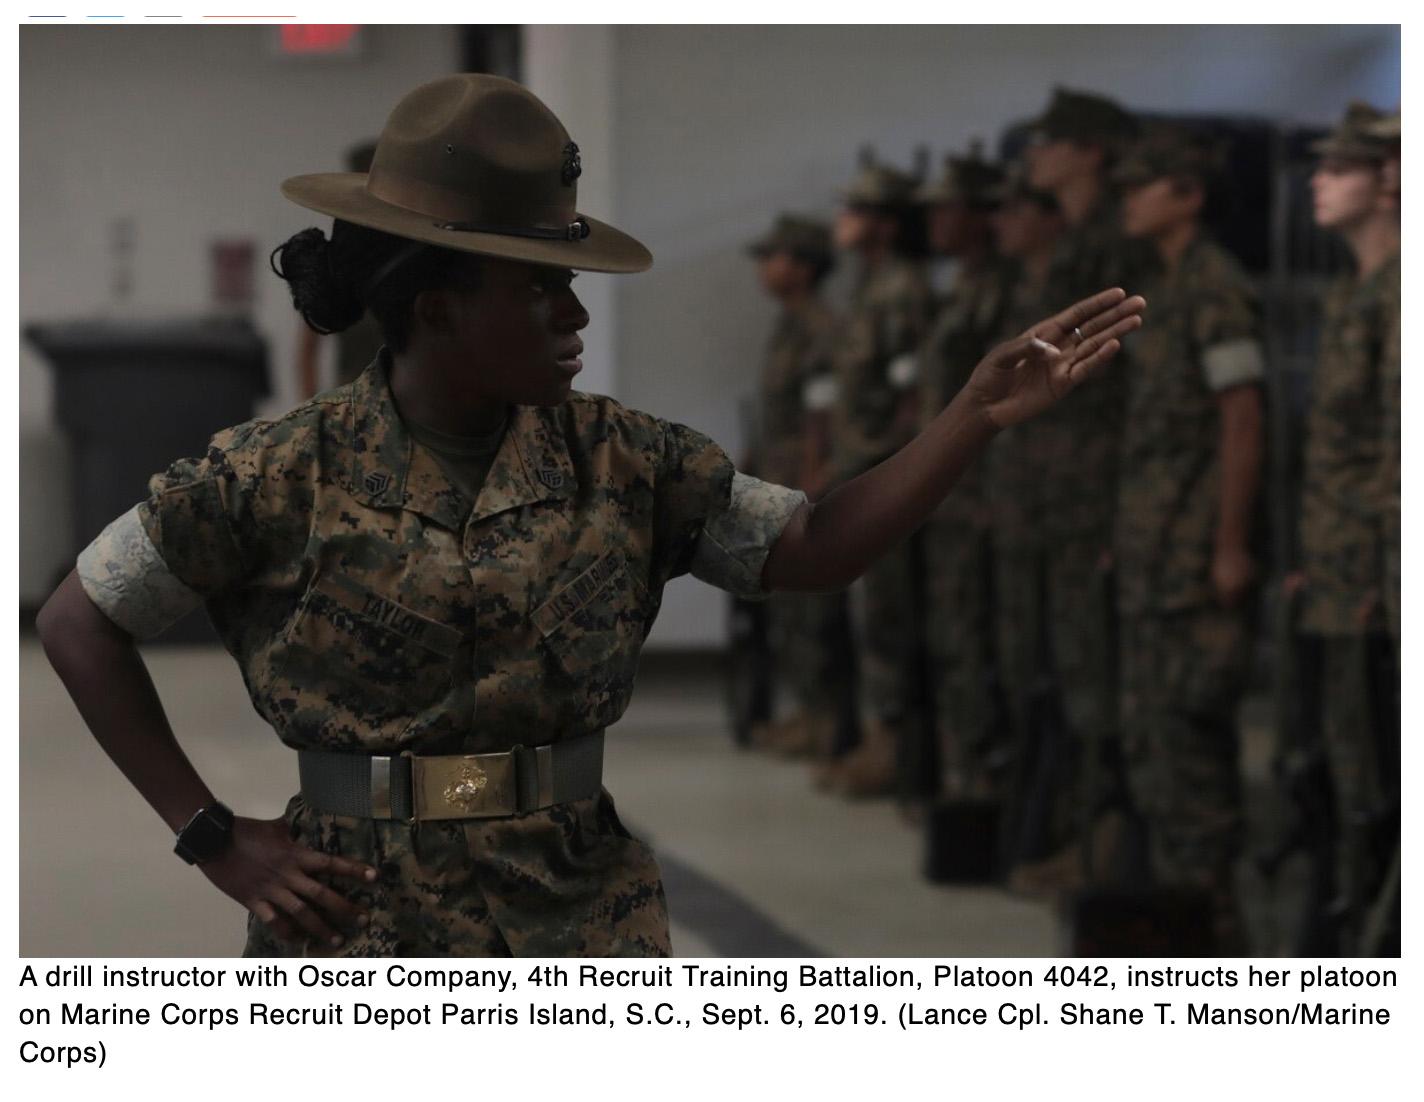  Women will attend boot camp at San Diego Marine Corps Recruit Depot for first time in history